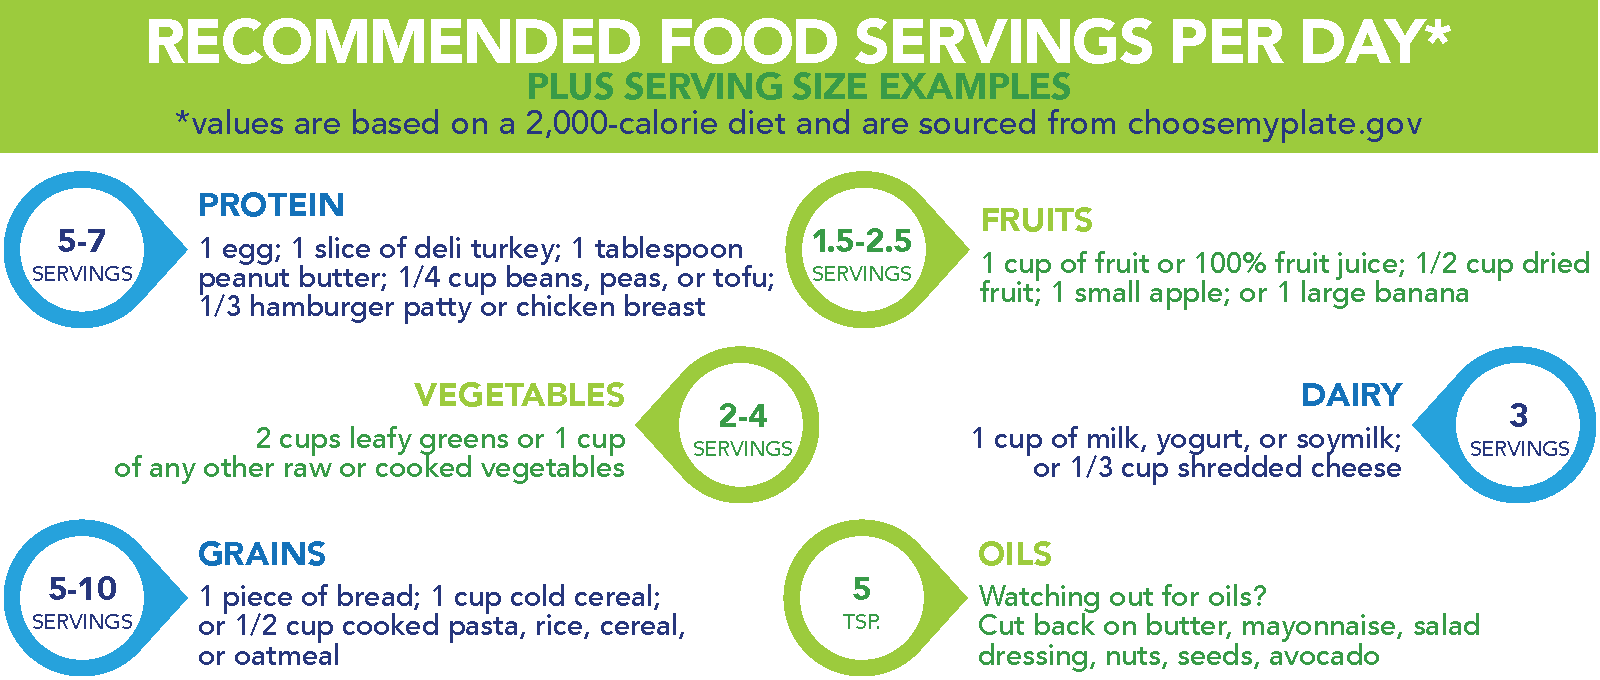 Recommended Food Servings Per Day* plus serving size examples *values are based on a 2,000-calorie diet and are sourced from choosemyplate.gov  5–7 servings of protein: 1 egg; 1 slice of deli turkey; 1 tablespoon peanut butter; ¼ cup beans, peas, or tofu; ⅓ hamburger patty or chicken breast 5–10 servings of grains: 1 piece of bread; 1 cup cold cereal; or ½ cup cooked pasta, rice, cereal, or oatmeal 3 servings of dairy: 1 cup of milk, yogurt, or soymilk; or ⅓ cup shredded cheese 2–4 servings of vegetables: 2 cups leafy greens or 1 cup of any other raw or cooked vegetables 1.5–2.5 servings of fruits: 1 cup of fruit or 100% fruit juice; ½ cup dried fruit; 1 small apple; or 1 large banana 5 teaspoons of oils: Watching out for oils? Cut back on butter, mayonnaise, salad dressing, nuts, seeds, avocado.